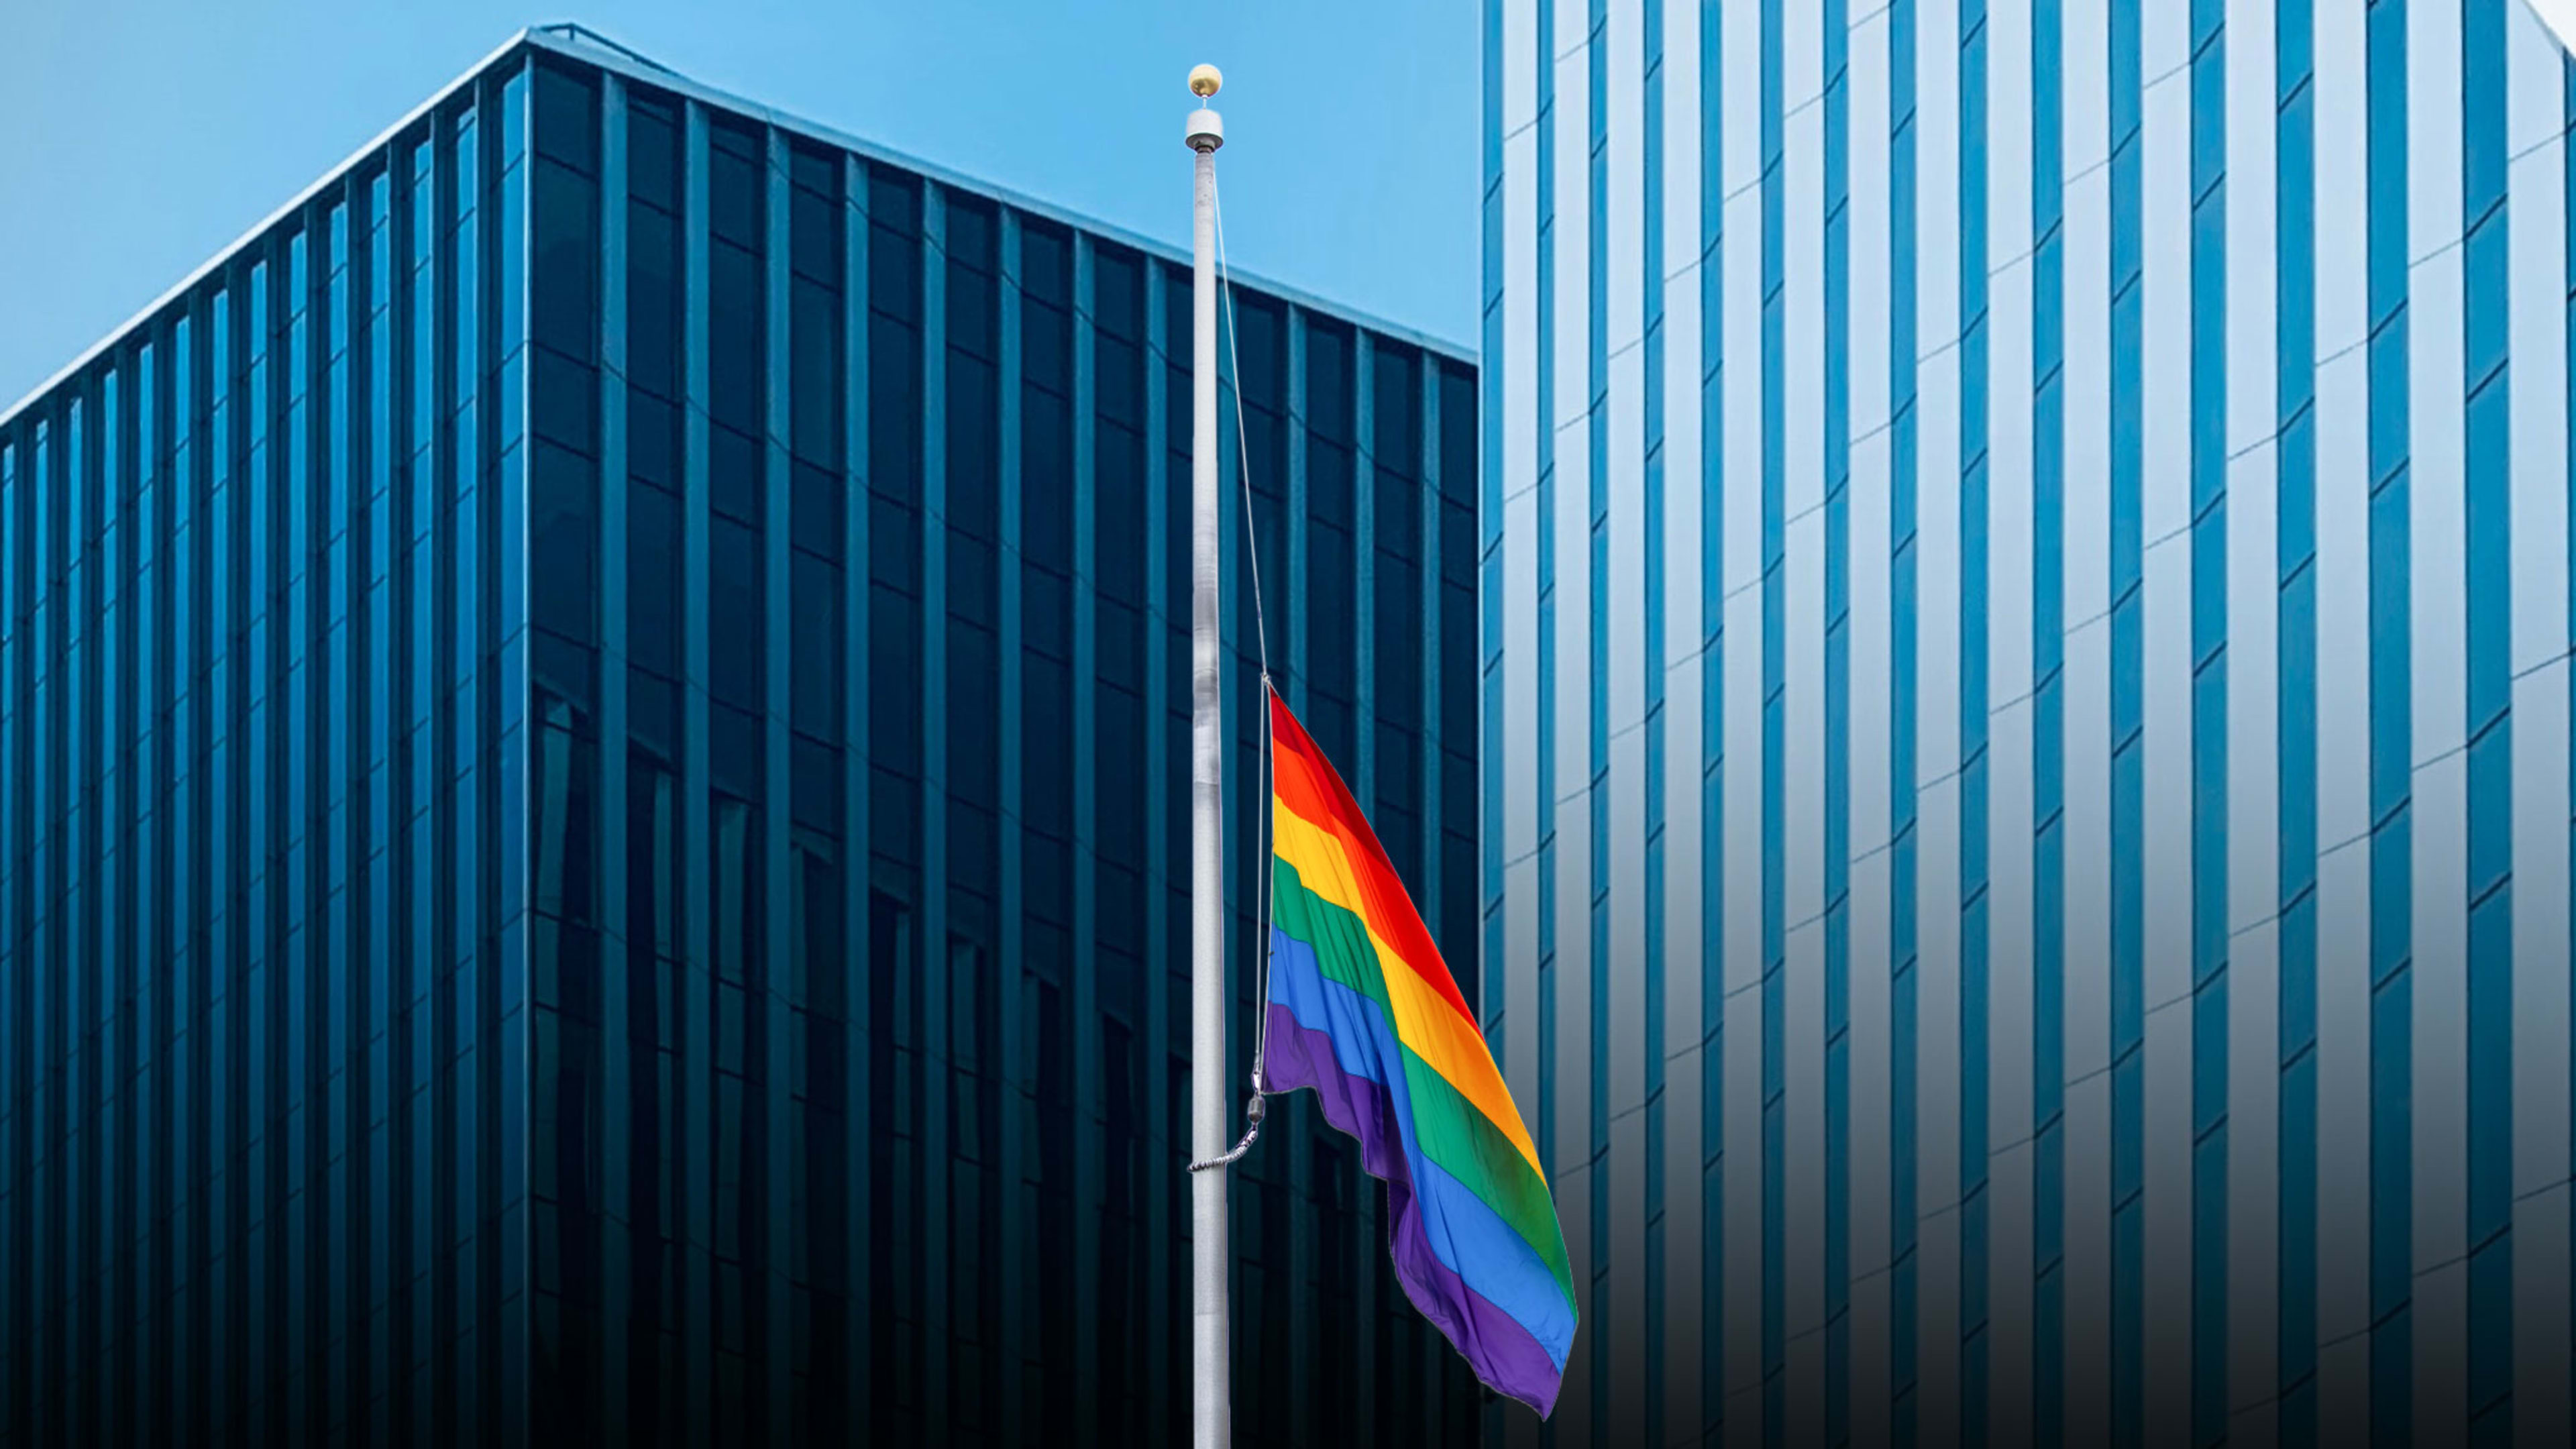 Most LGBTQ+ employees are not comfortable being out at work. Companies are failing them